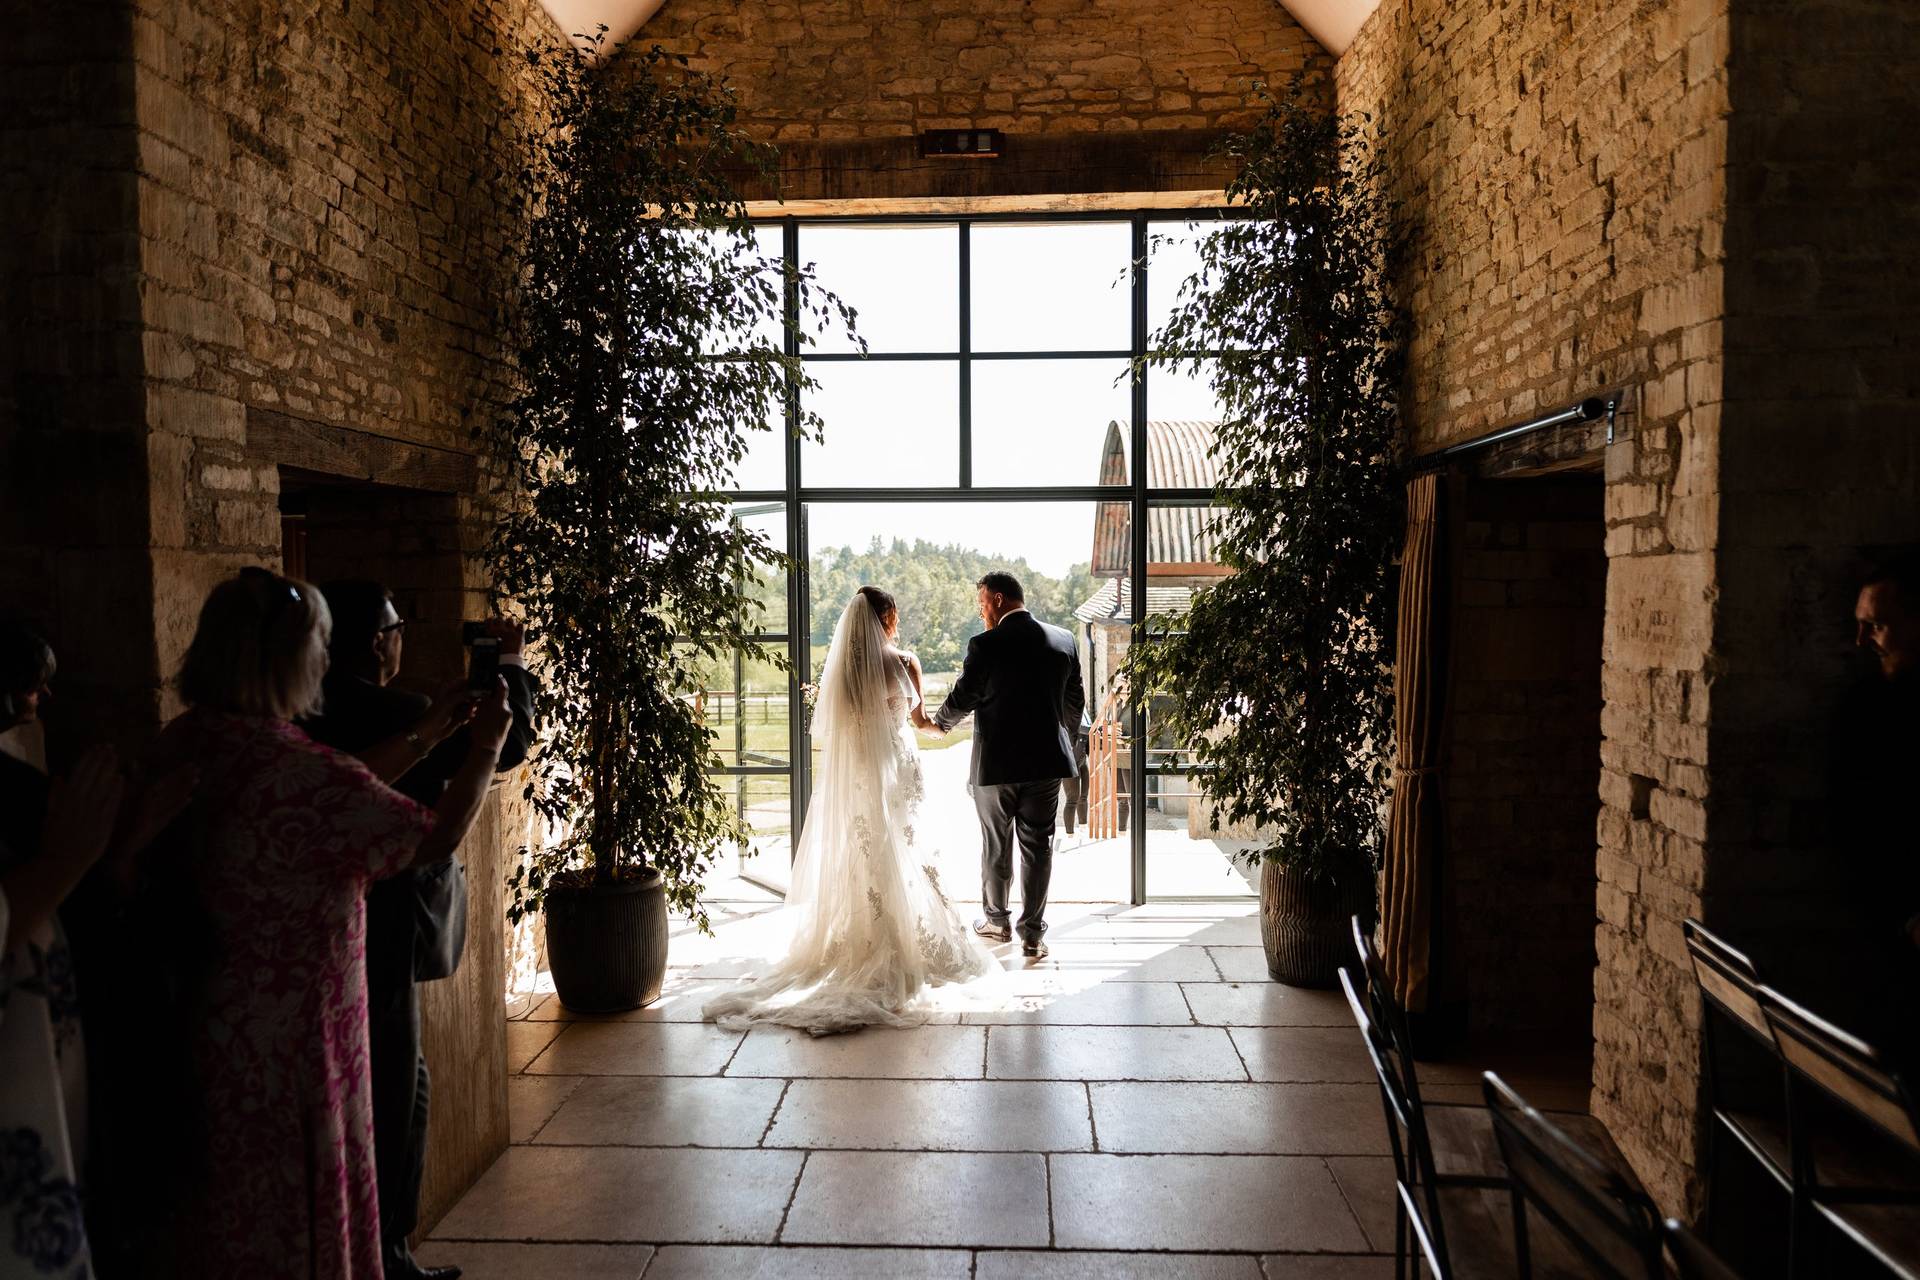 Old Gore Barn Wedding Venue Cirencester, Gloucestershire | hitched.co.uk